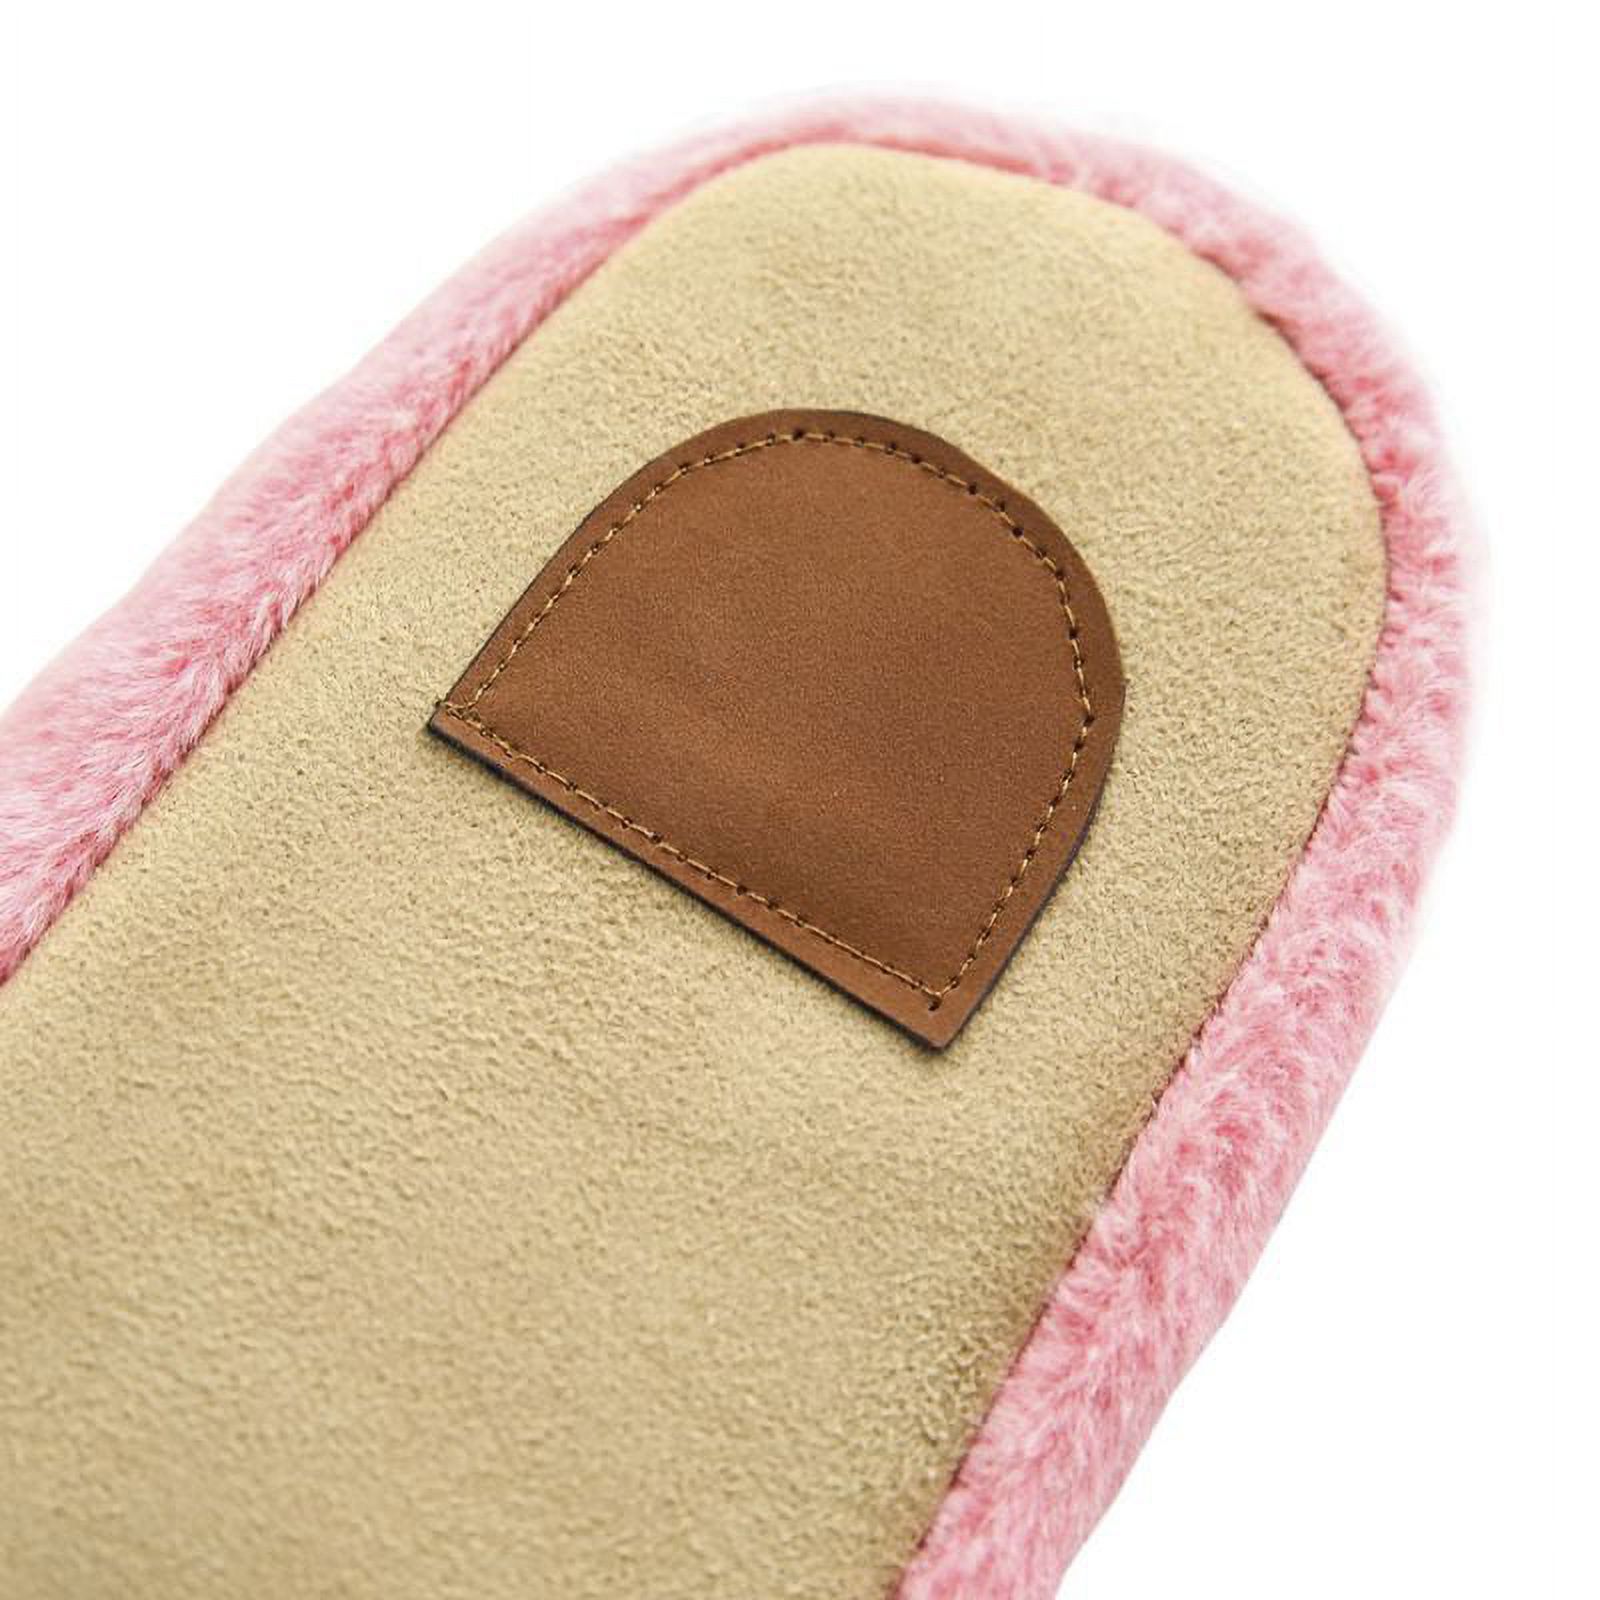 Clearance Women Men Winter Warm Fleece Anti-Slip Slippers Indoor House Shoes Lovers Home Floor Slippers Shoes - image 5 of 5